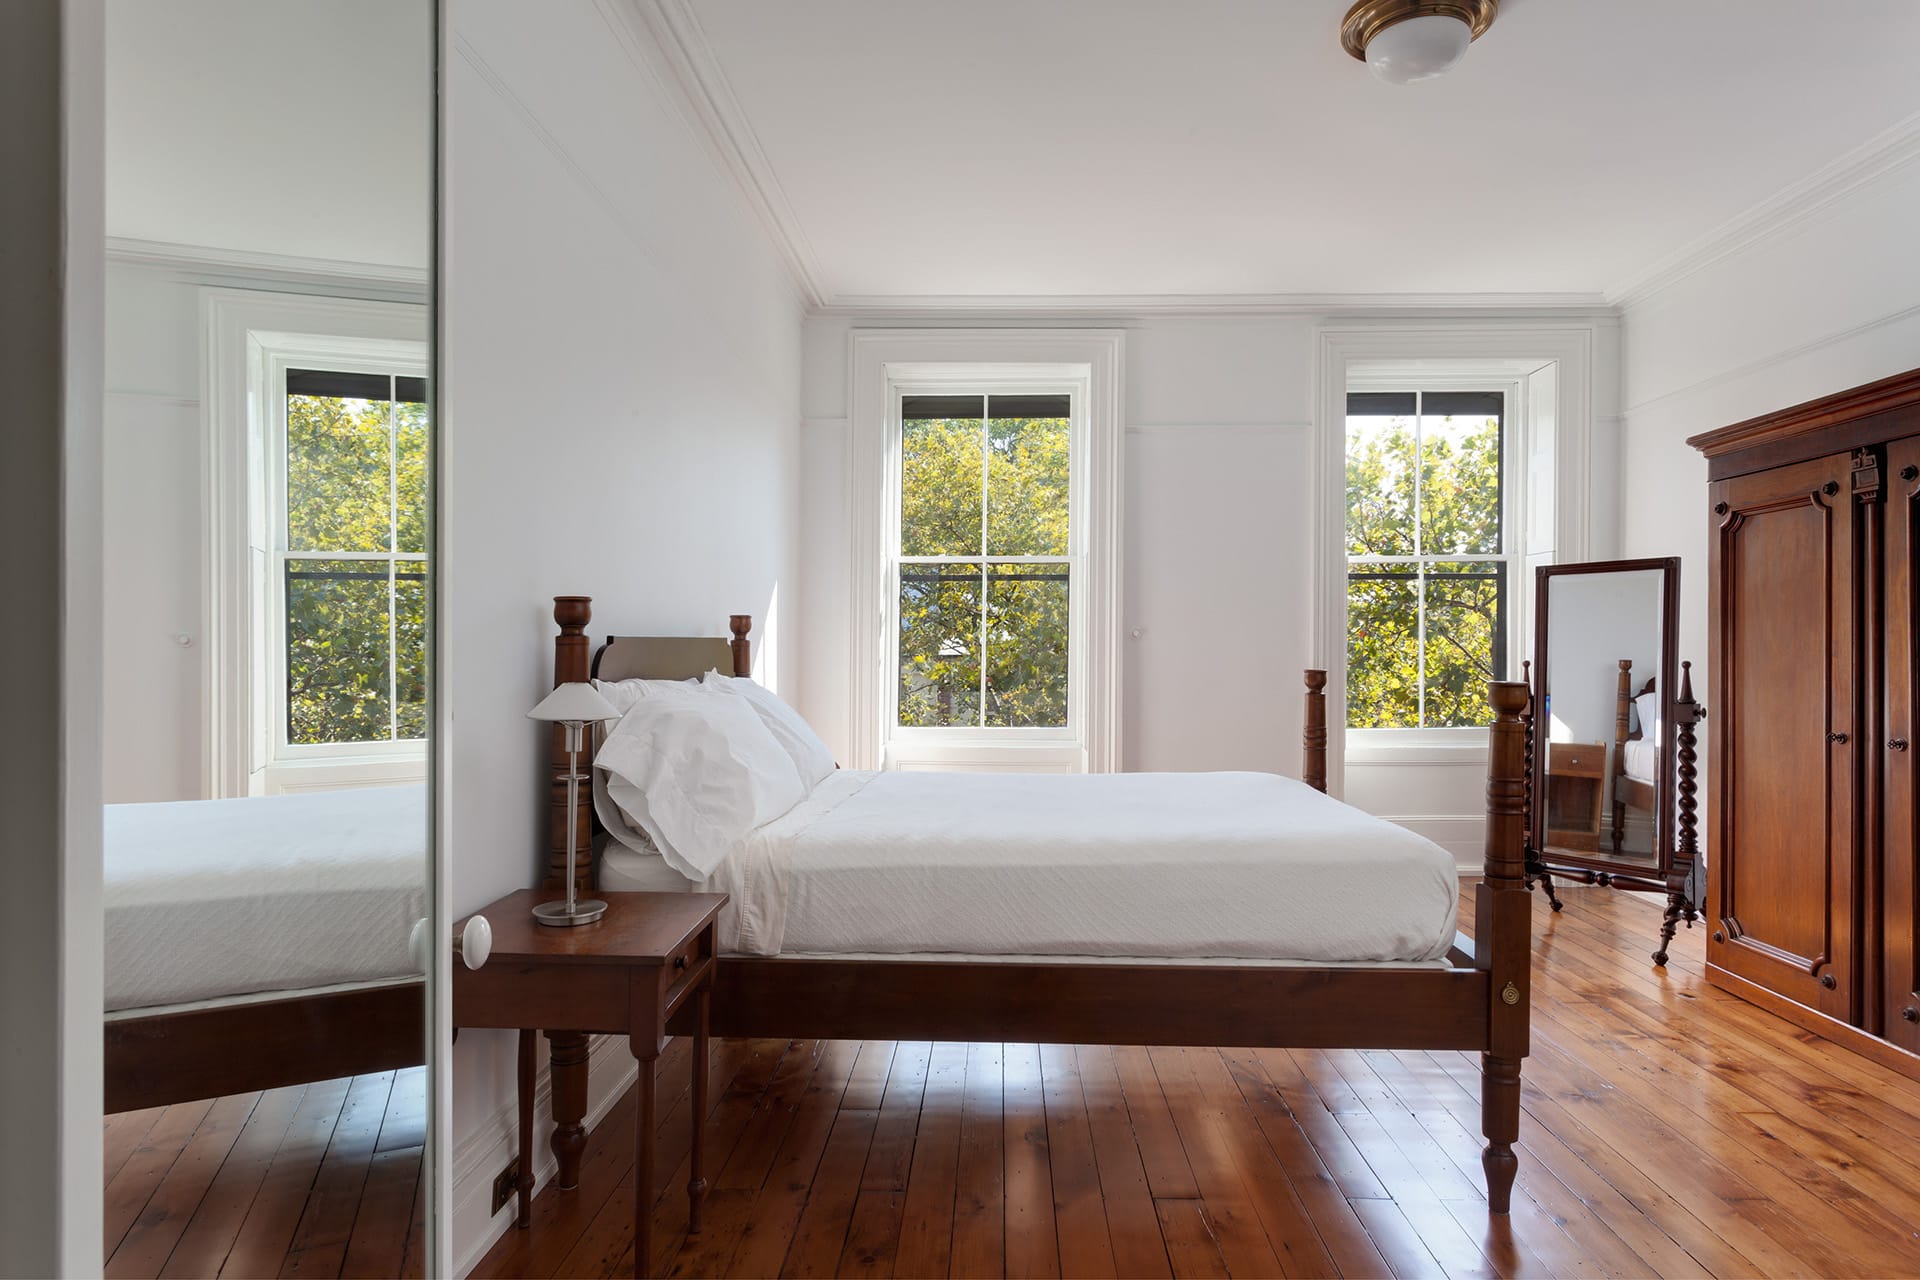 A bedroom in a Brooklyn Heights home with dark wood floors, wardrobe, and four-post bed